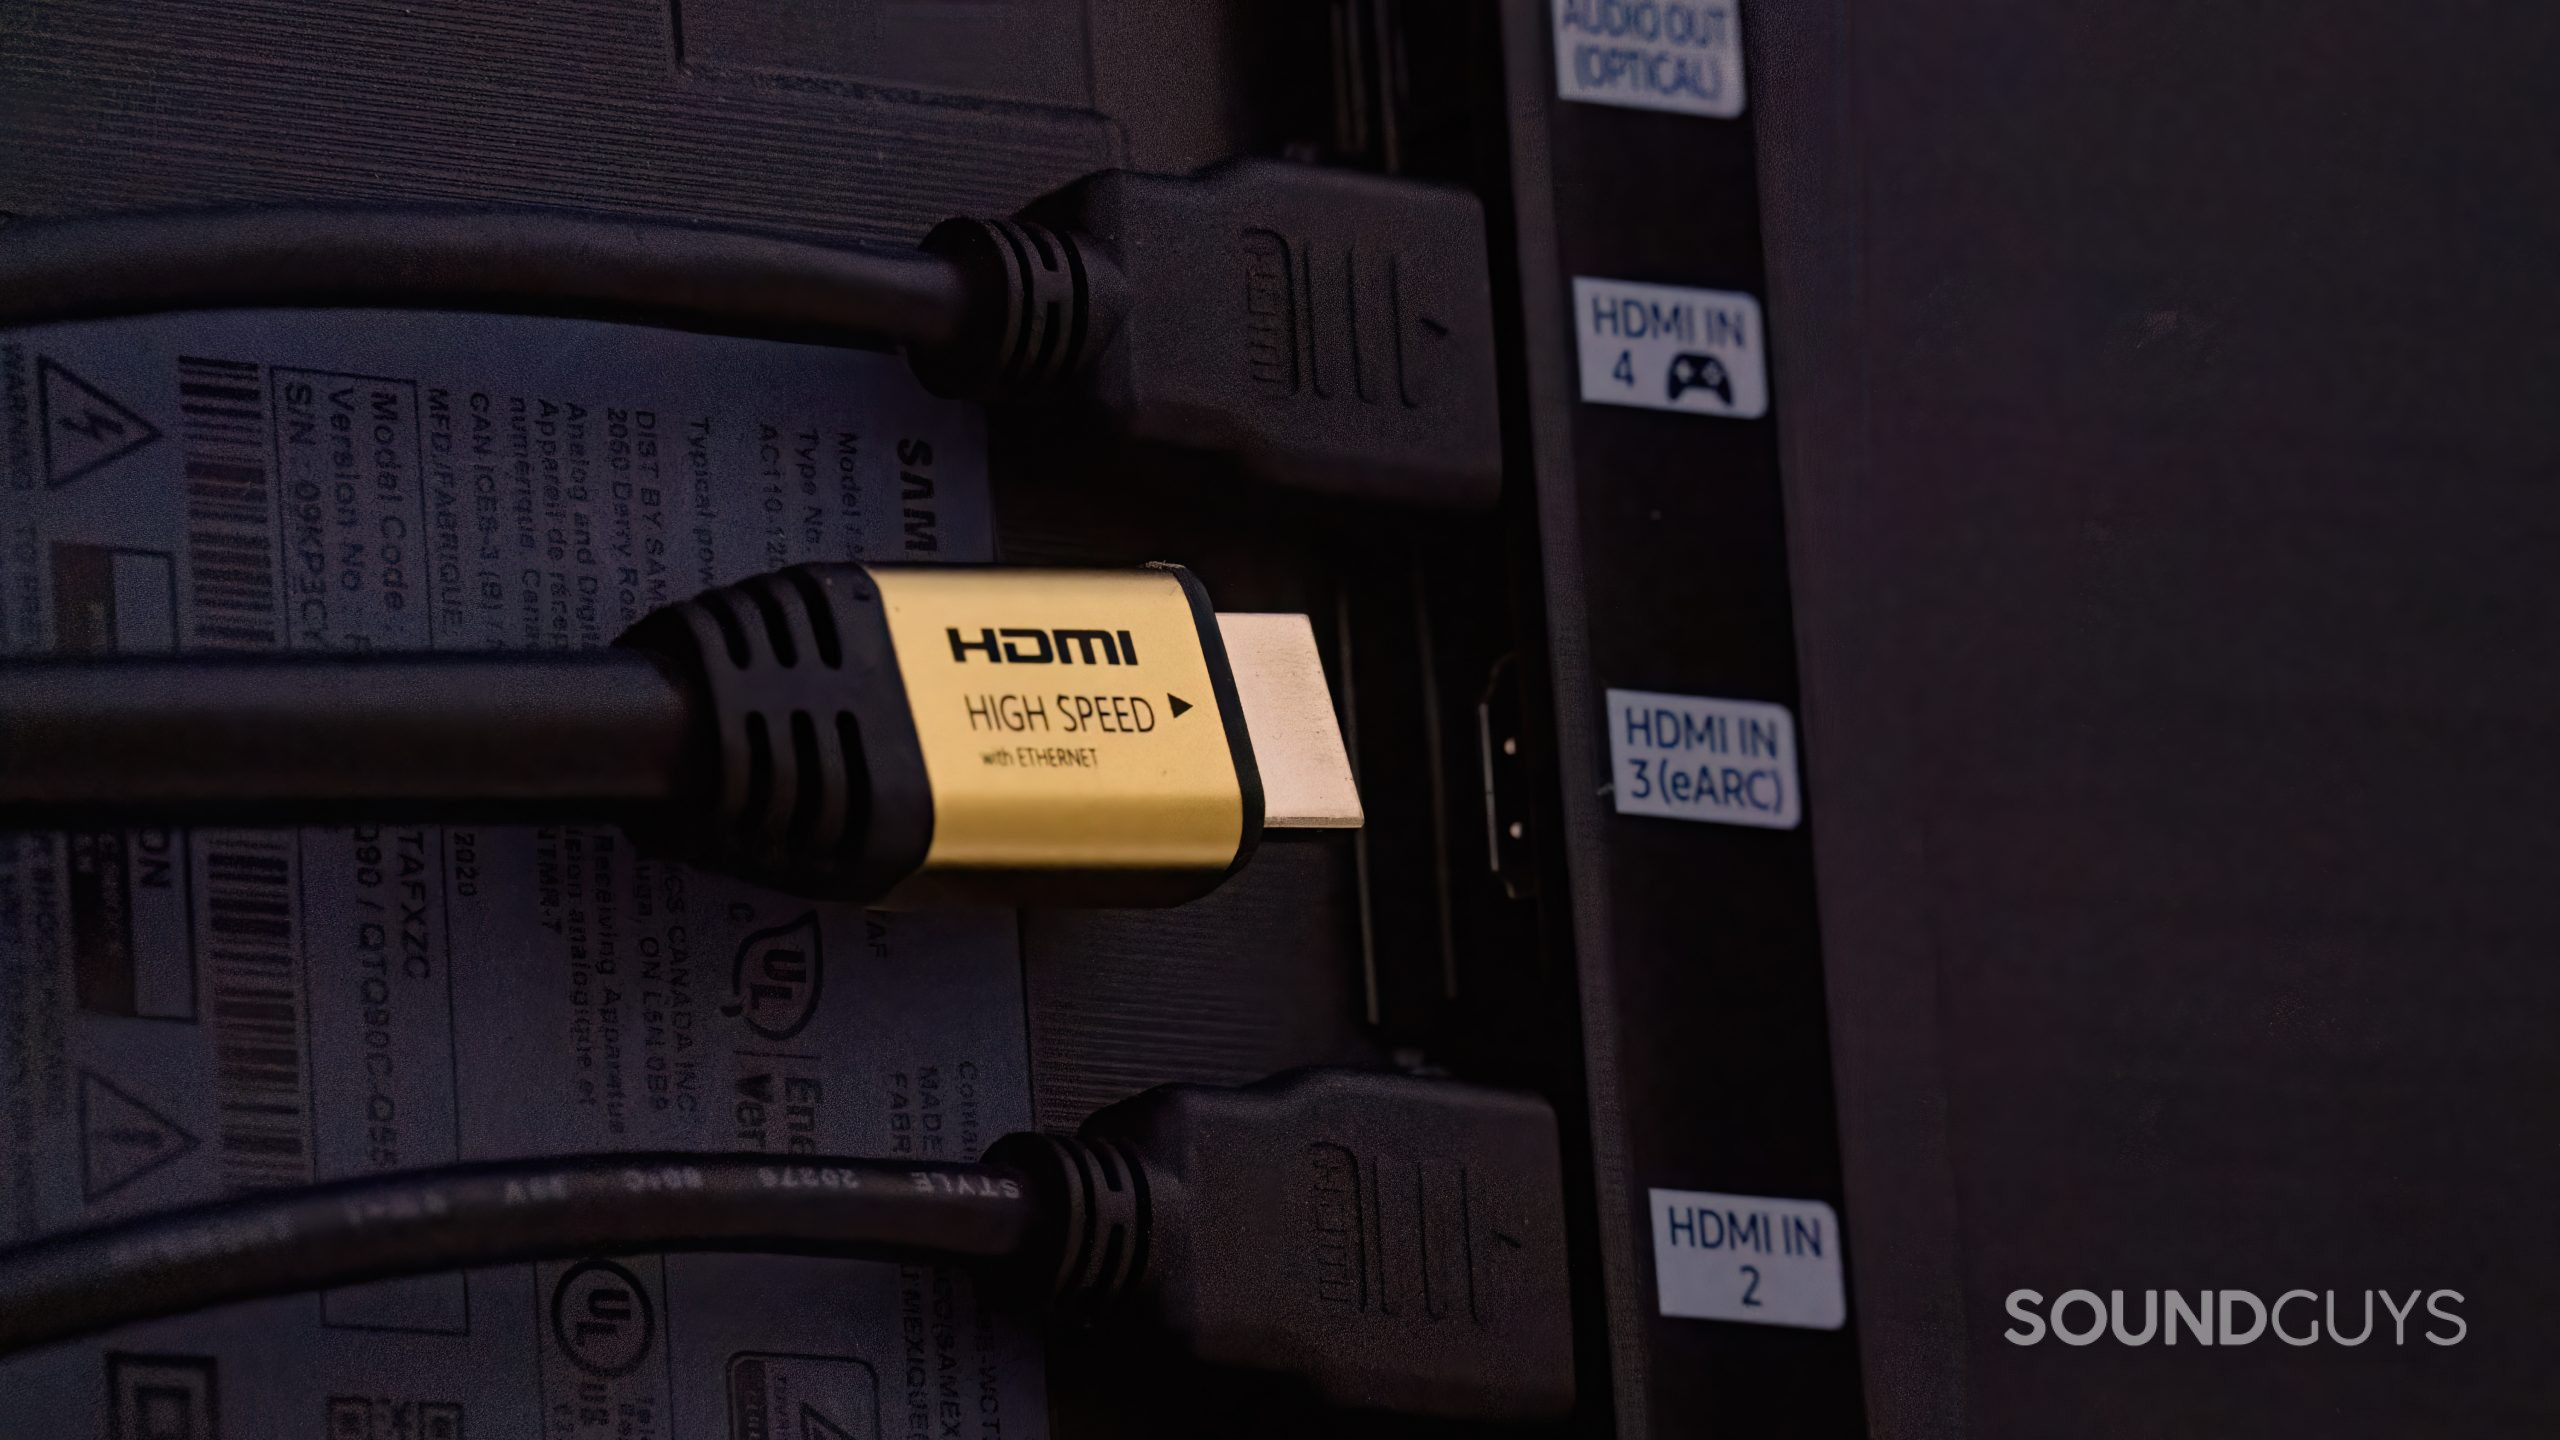 A row of HDMI input sockets on the back of a TV, one of which is labelled HDMI eARC. A cable is being plugged into this one.